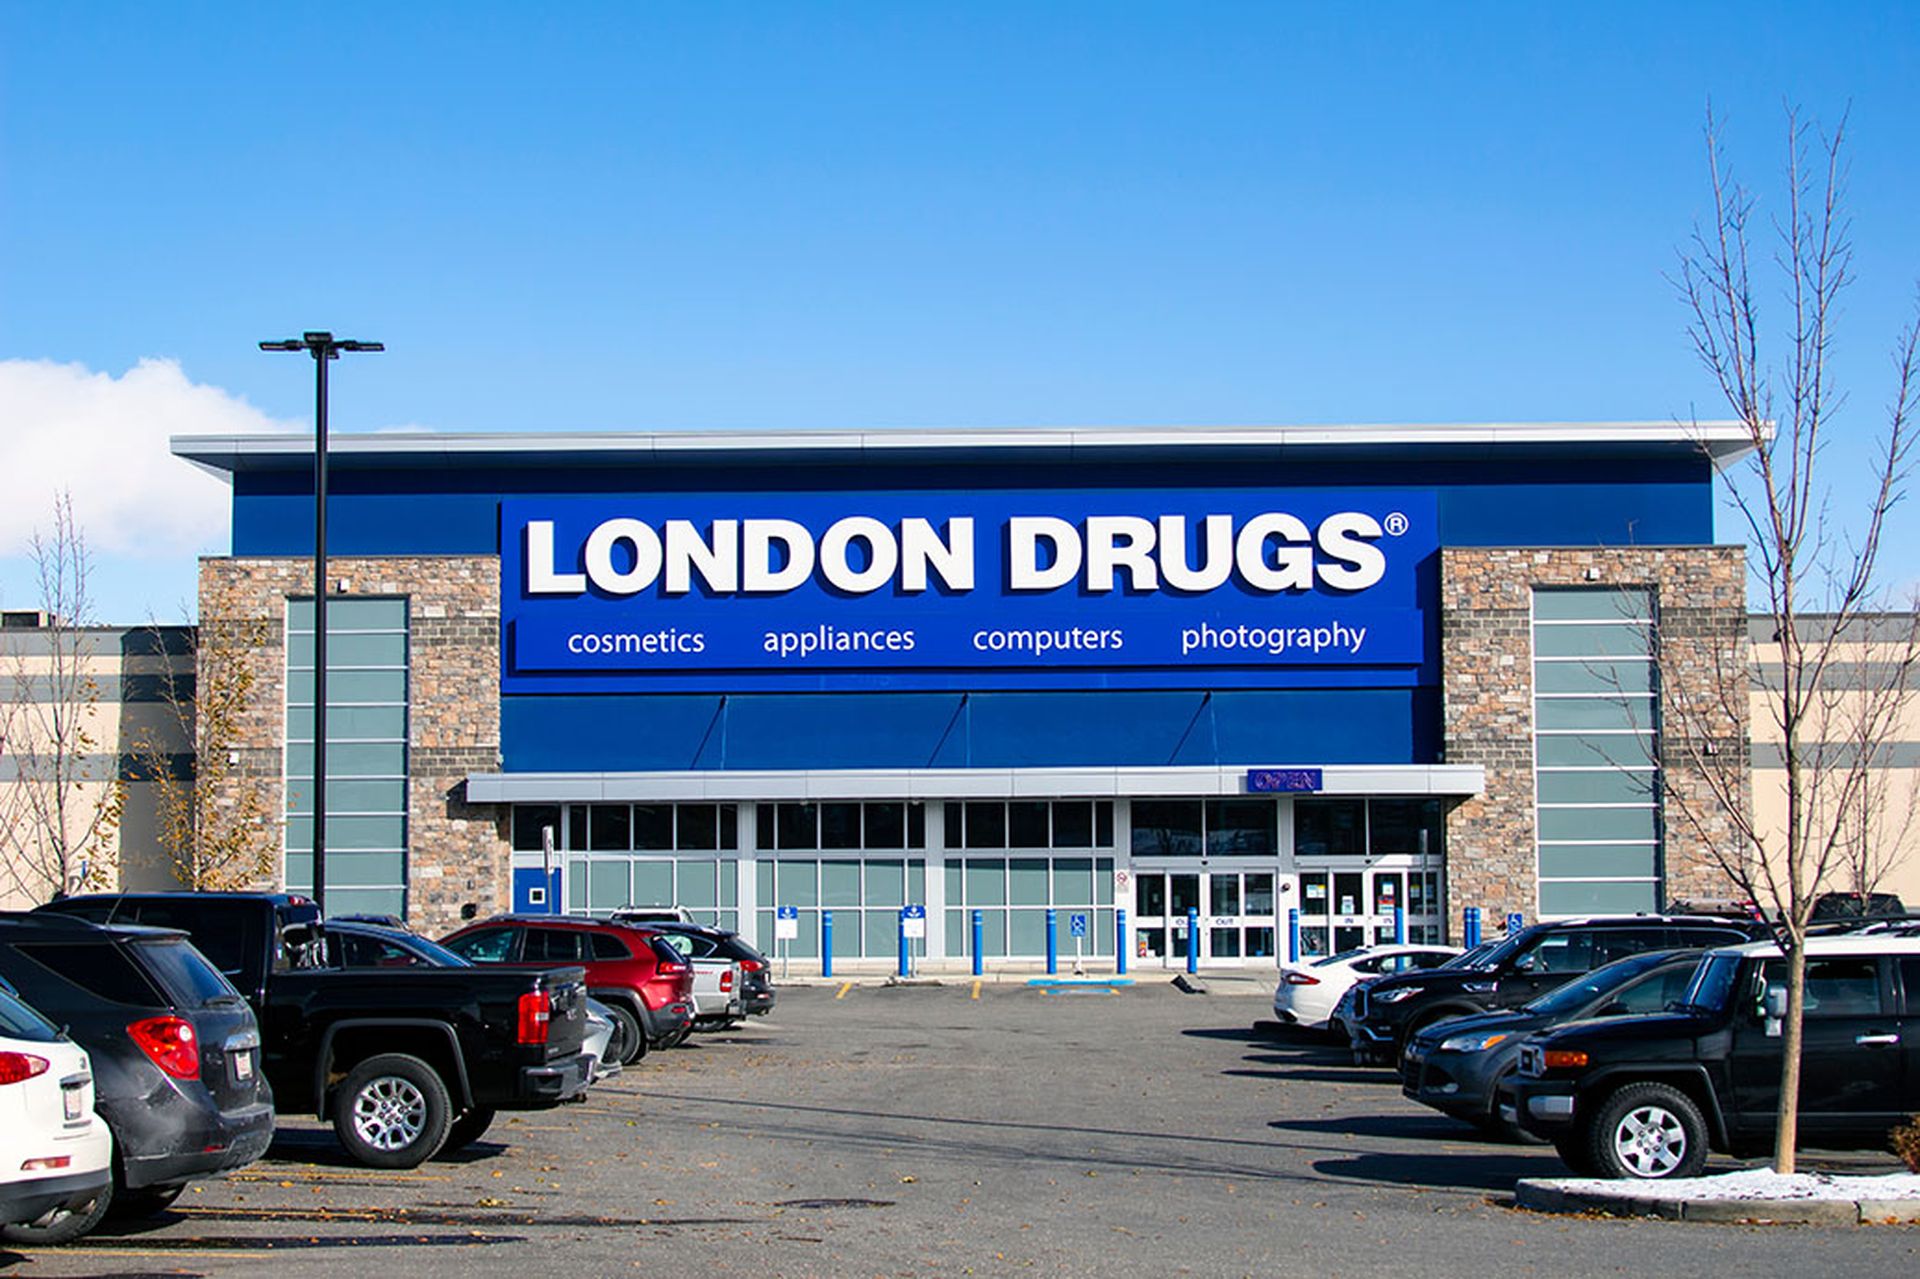 London Drugs a Canadian retail store with headquarters in Richmond, British Columbia.